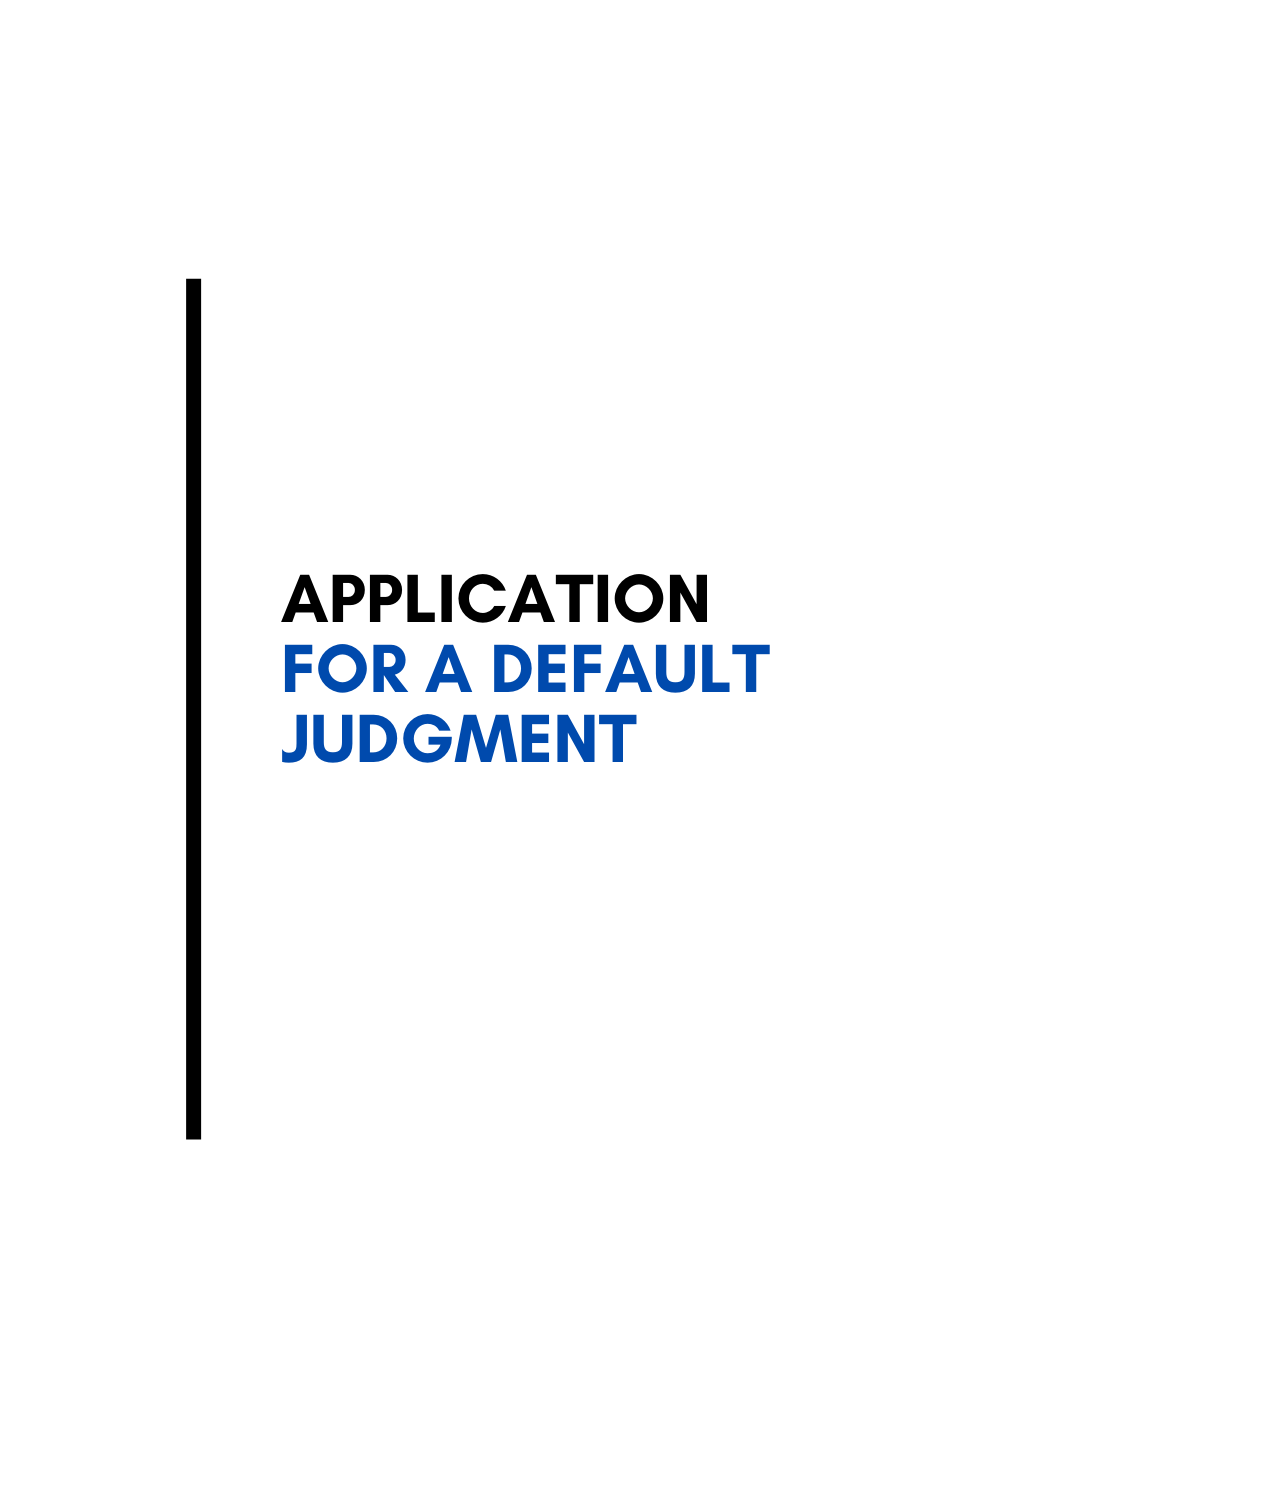 Application for a Default Judgment